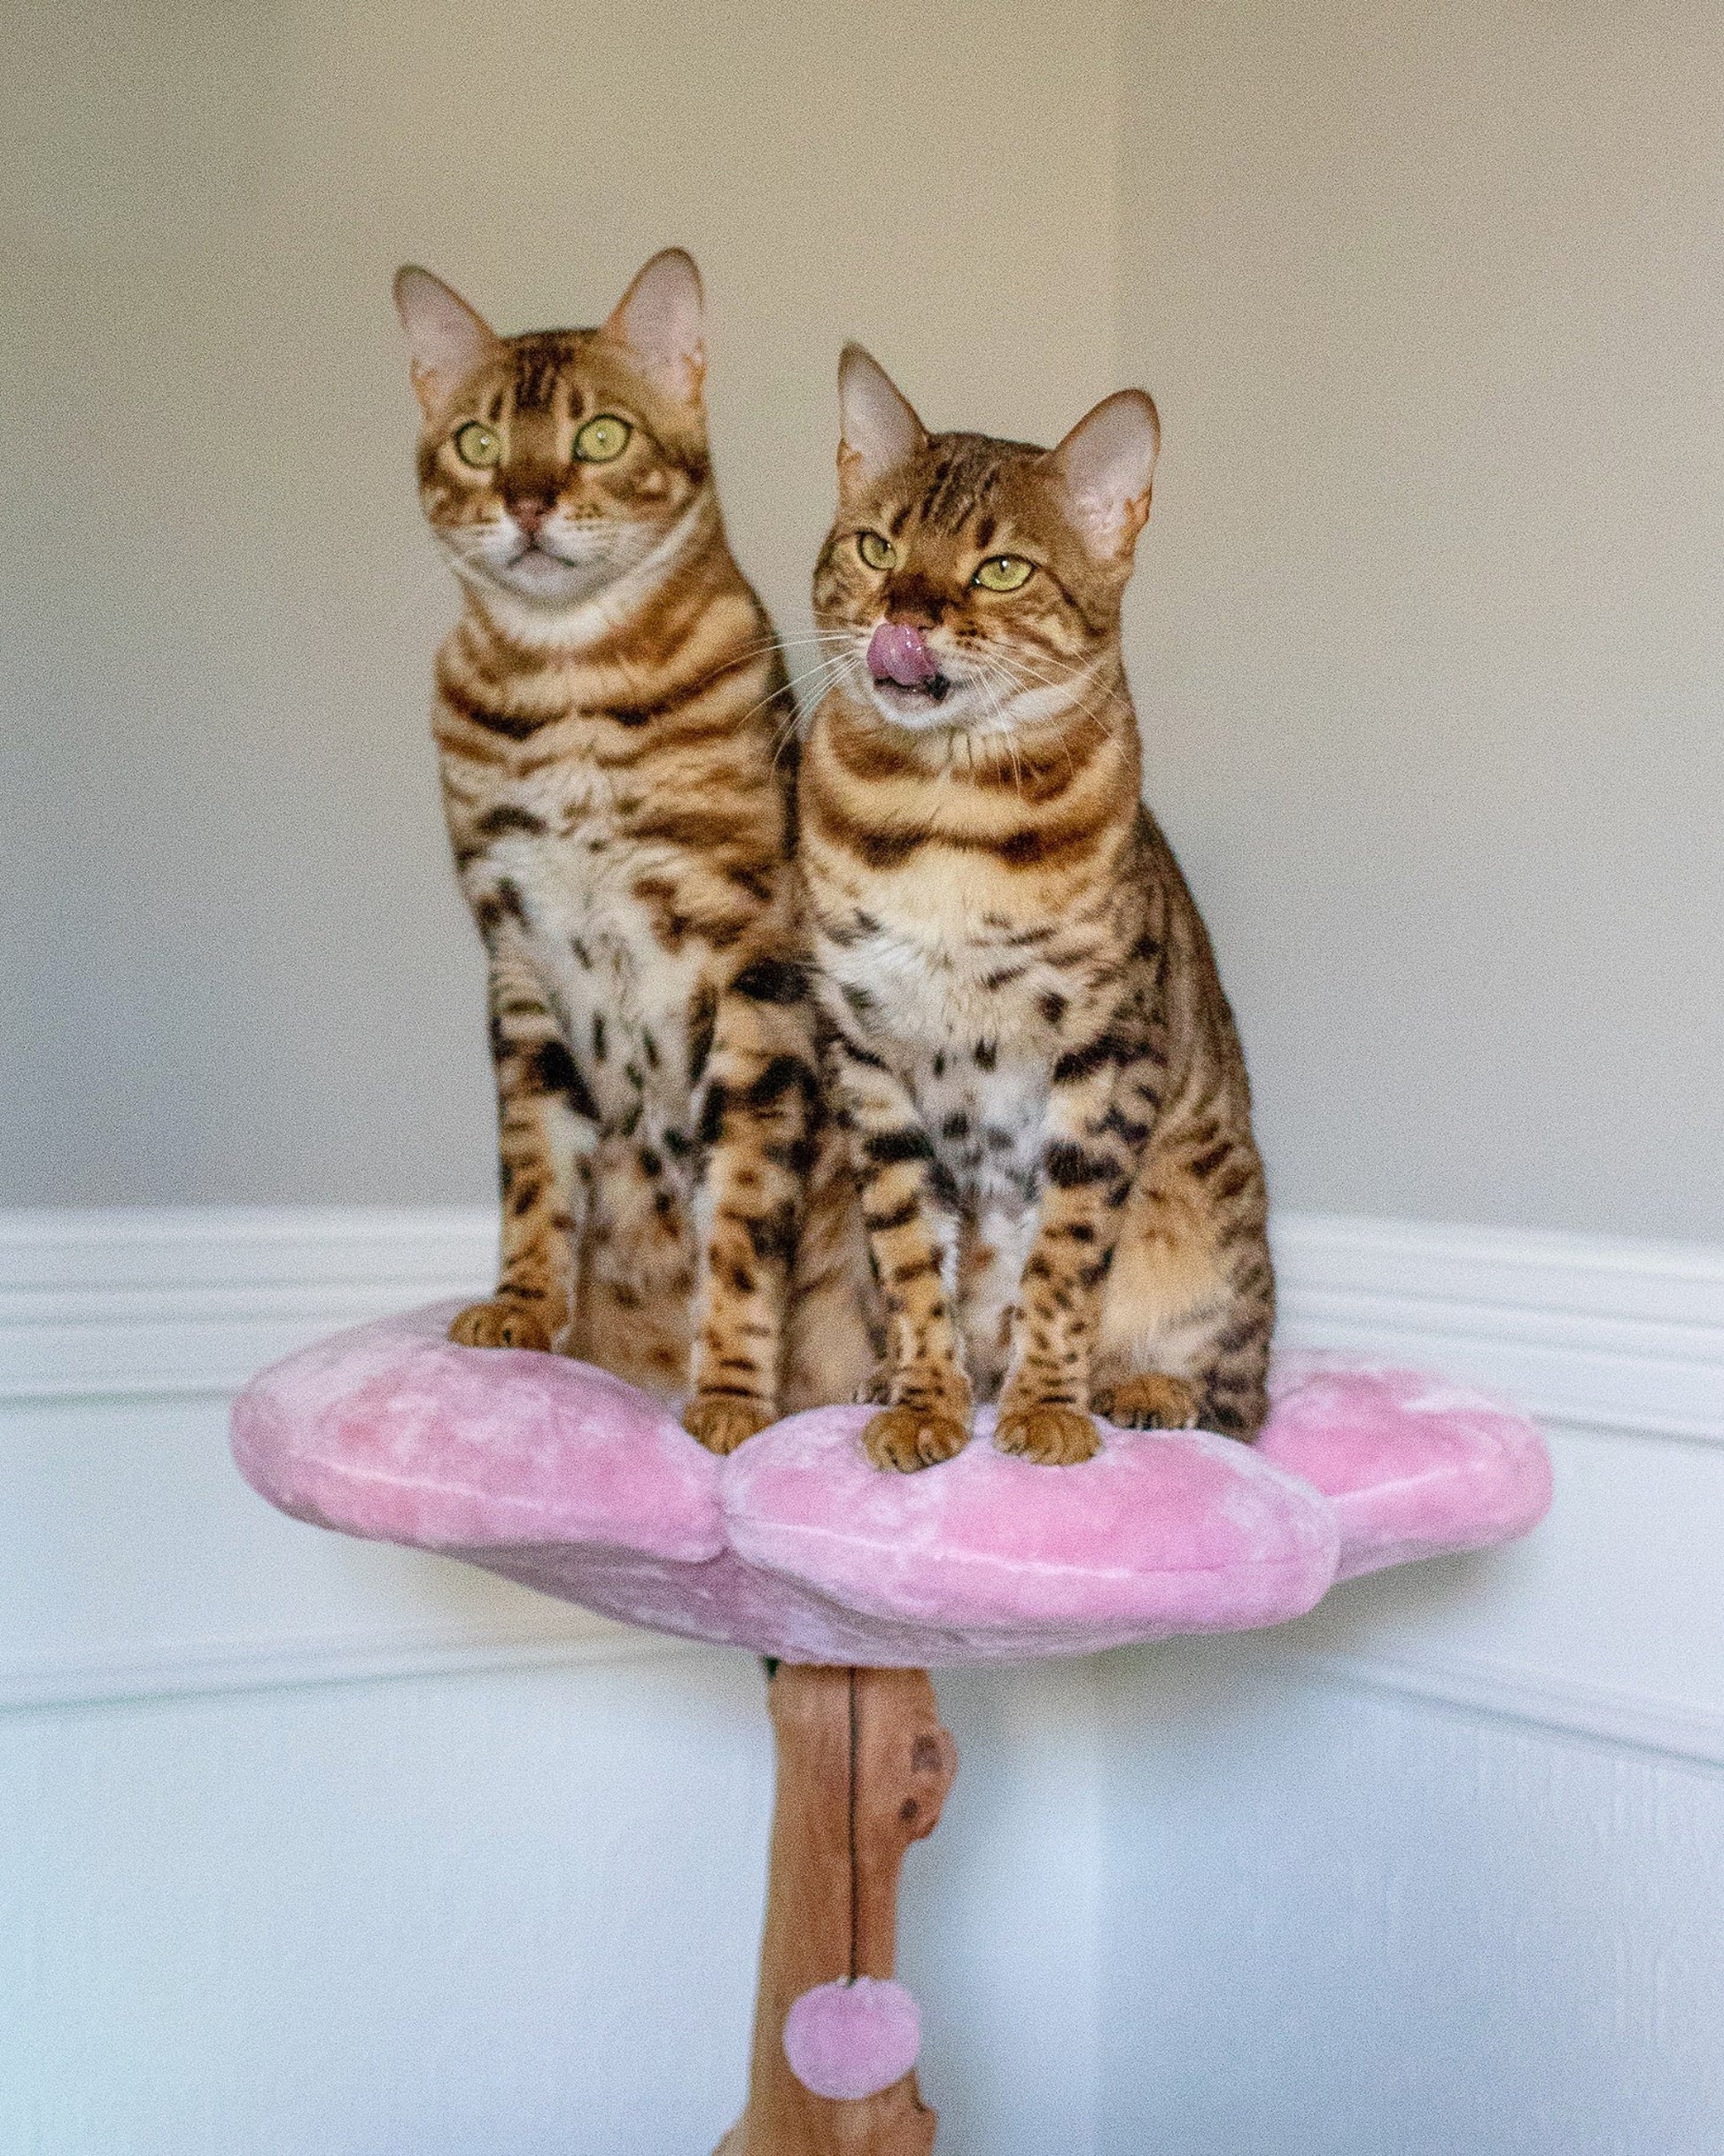 Two cats relaxing on a pink cherry blossom cat tree